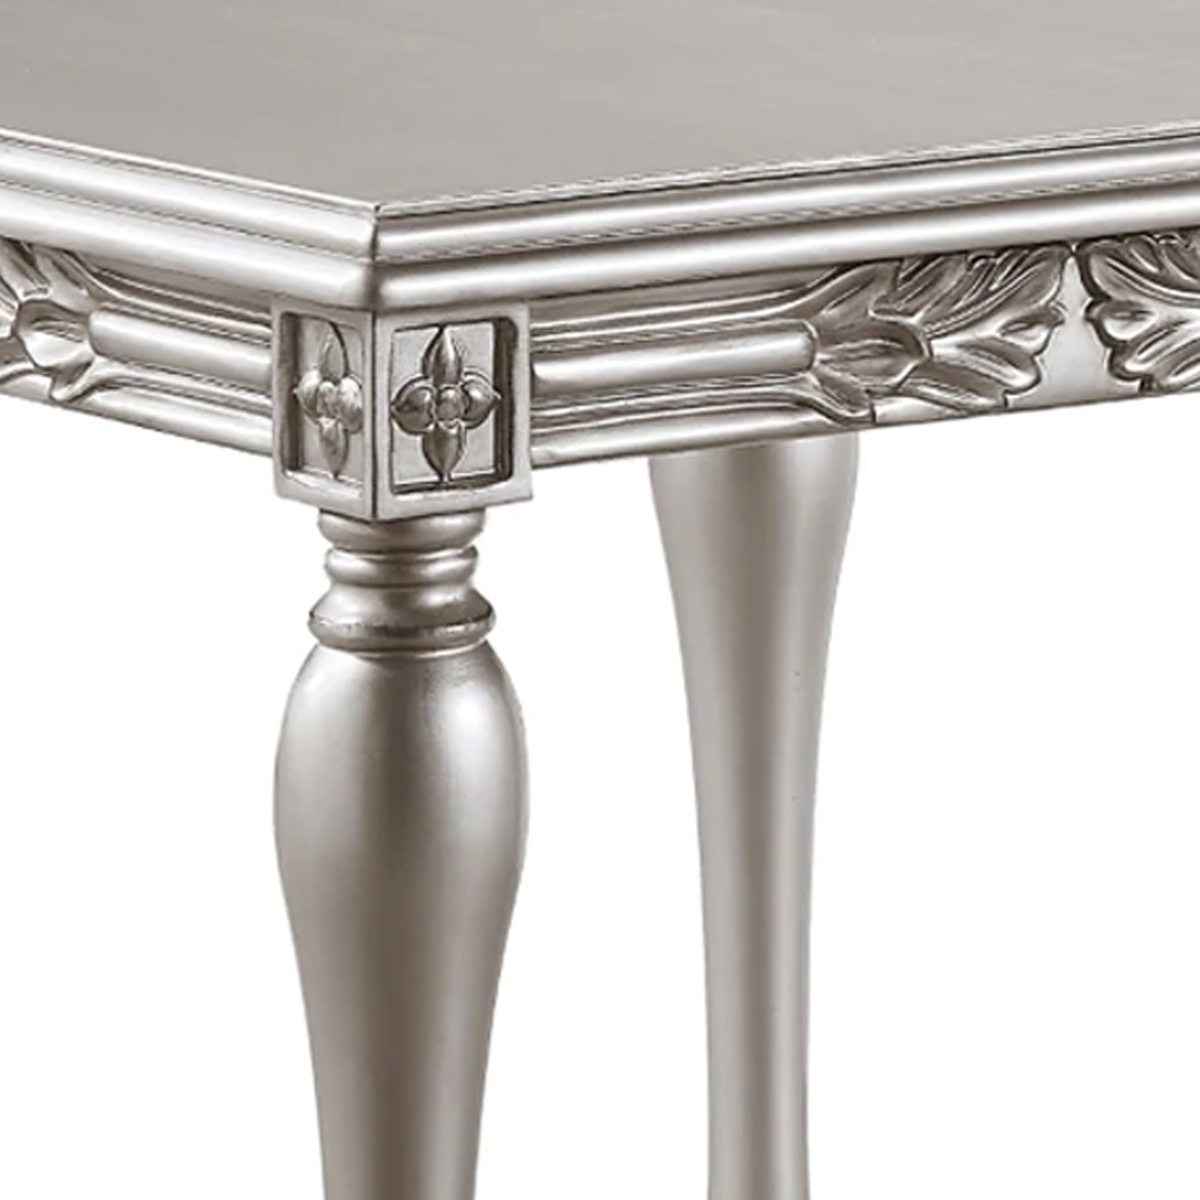 Sto 28 Inch Classic End Table, Square, Floral Trim, Wood, Silver- Saltoro Sherpi